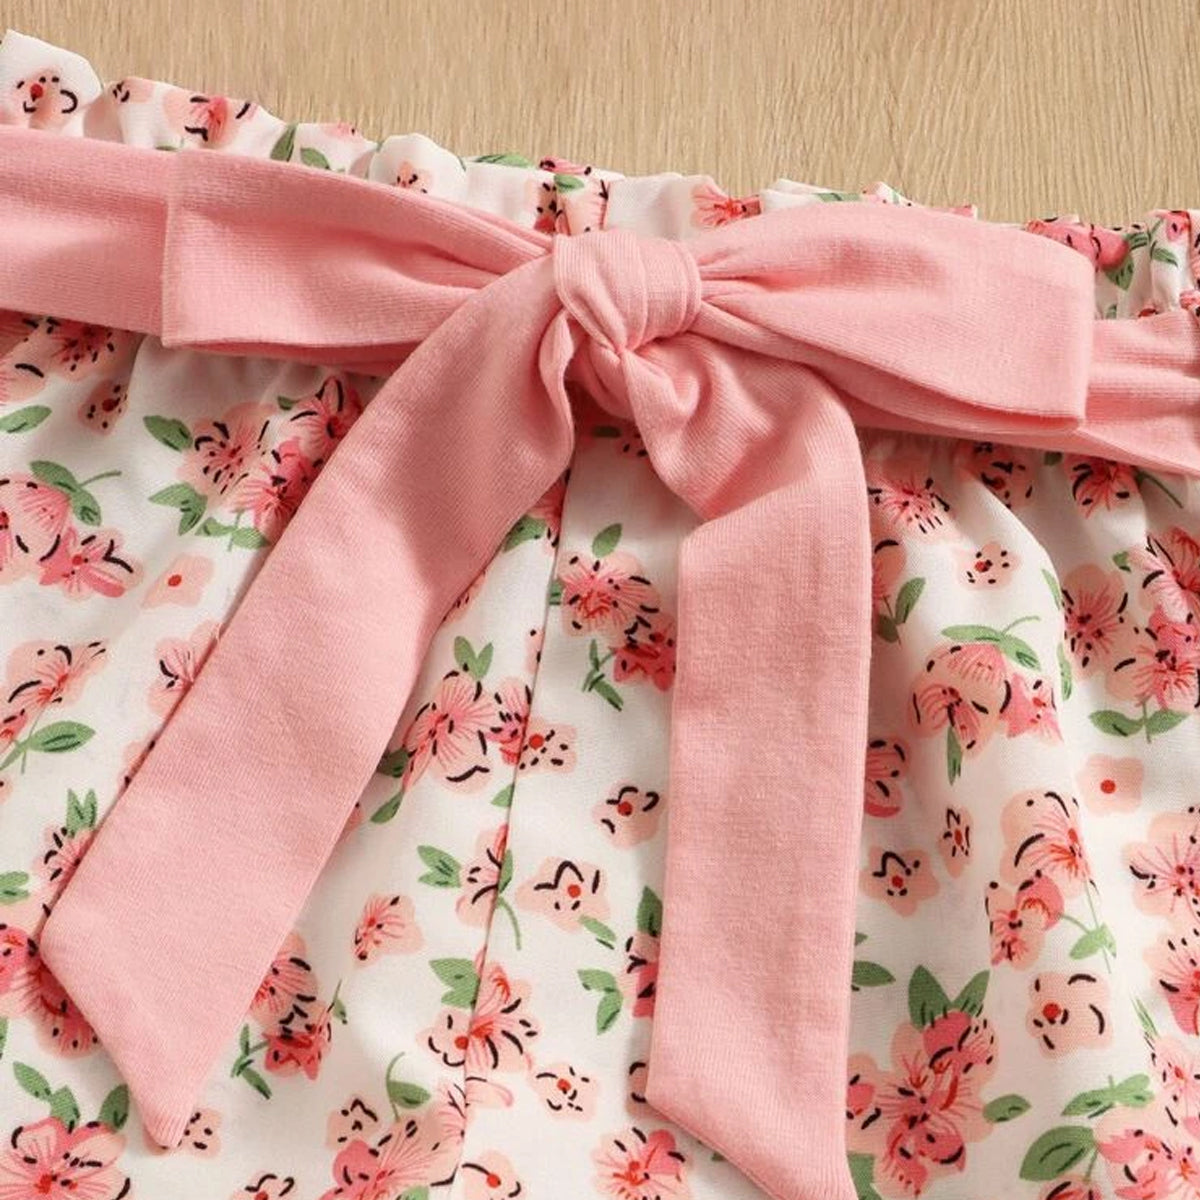 Crop Pink Floral Stylish Butterfly Sleeve Top And Belted Shorts For Baby Girls.